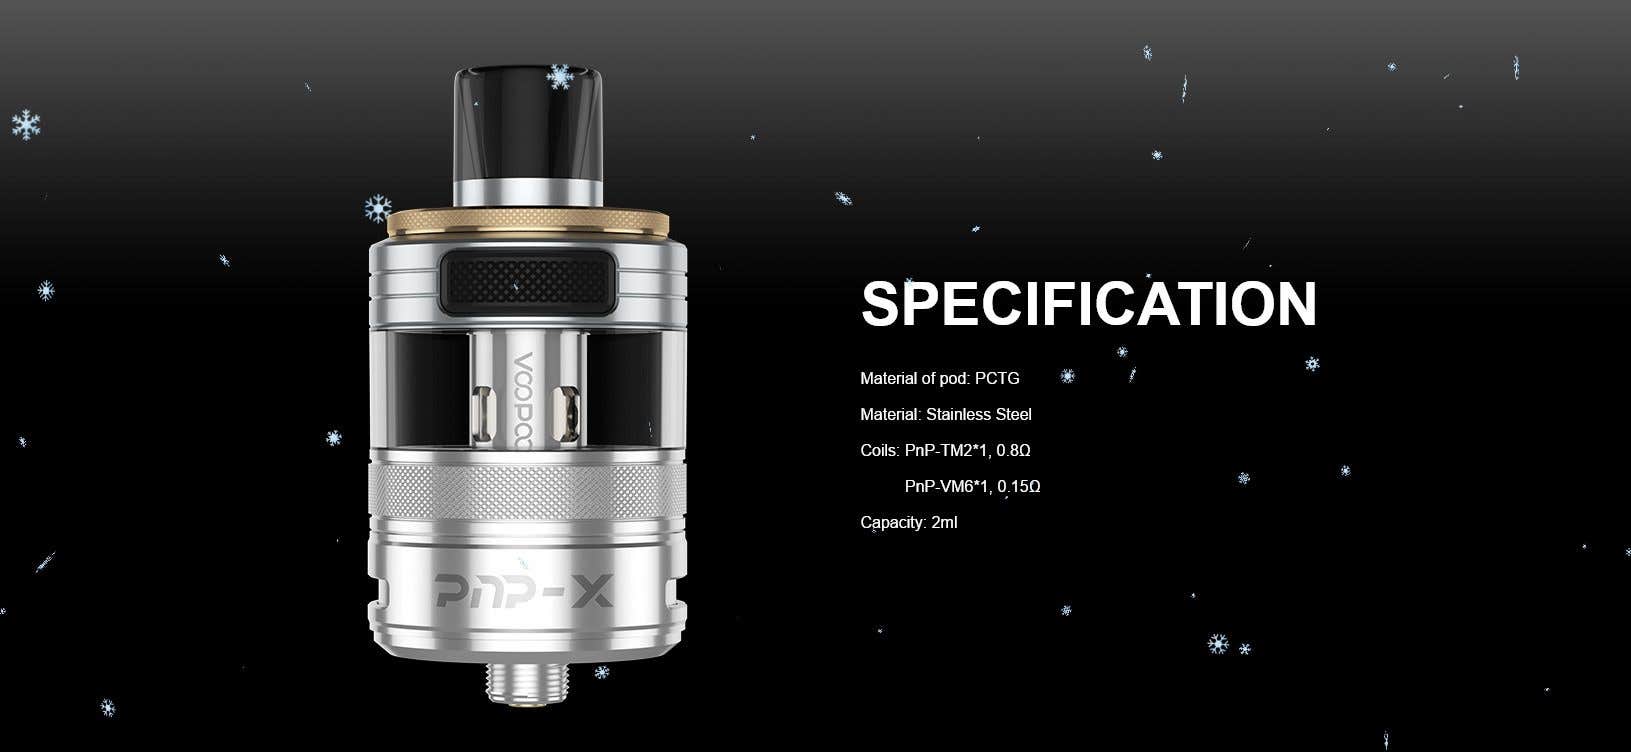 Specifications of the VooPoo PnP-X Pod Tank. Material: PCTG & stainless steel. Coils: PnP-TM2 (0.8 ohm) and PnP-VM6 (0.15 ohm).